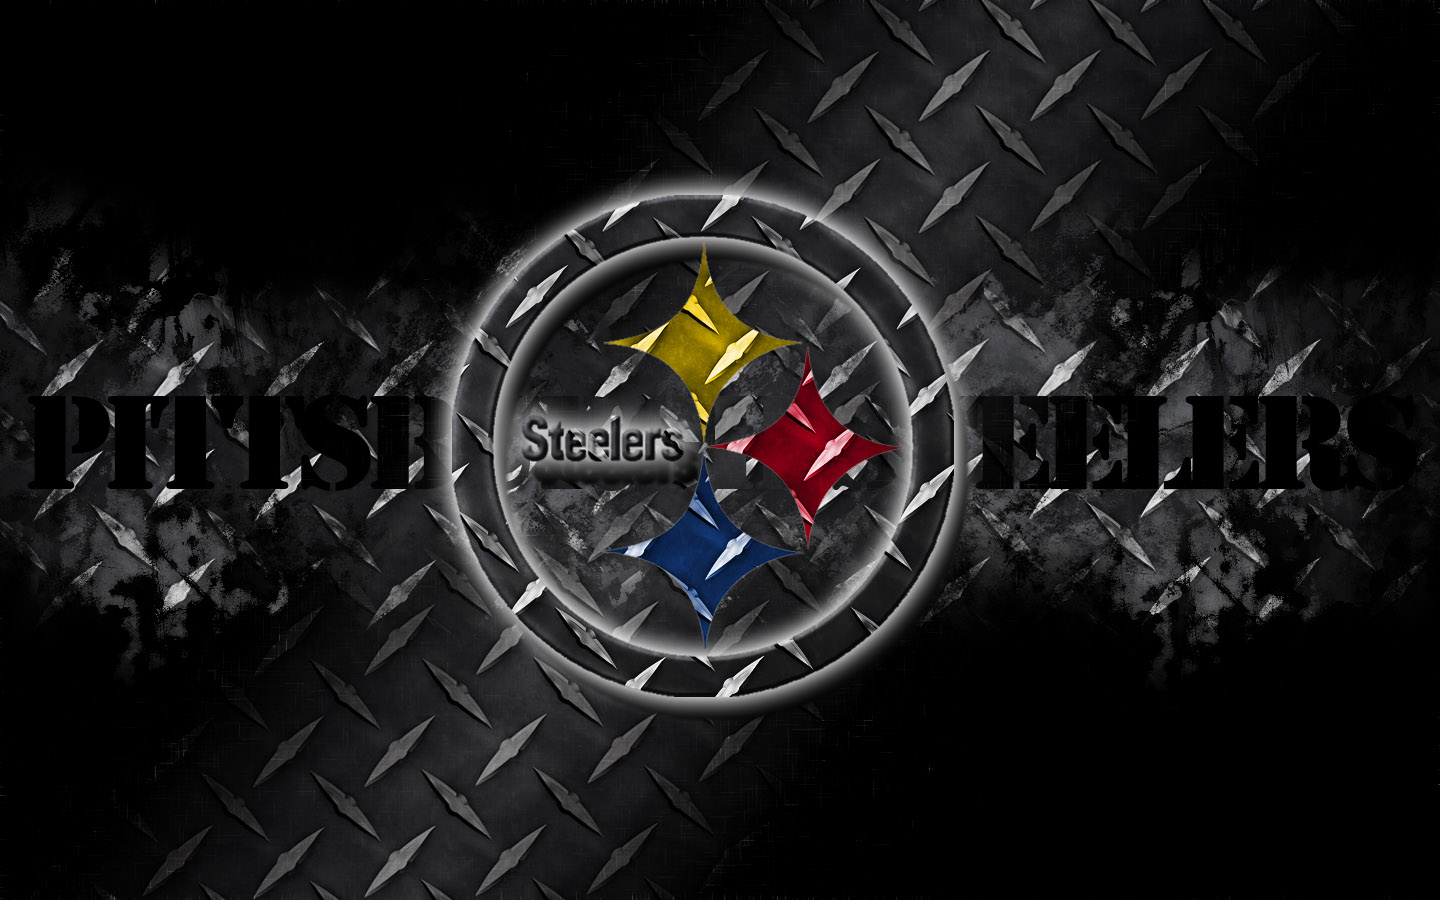 Steelers Wallpaper 2012 Images amp Pictures   Becuo